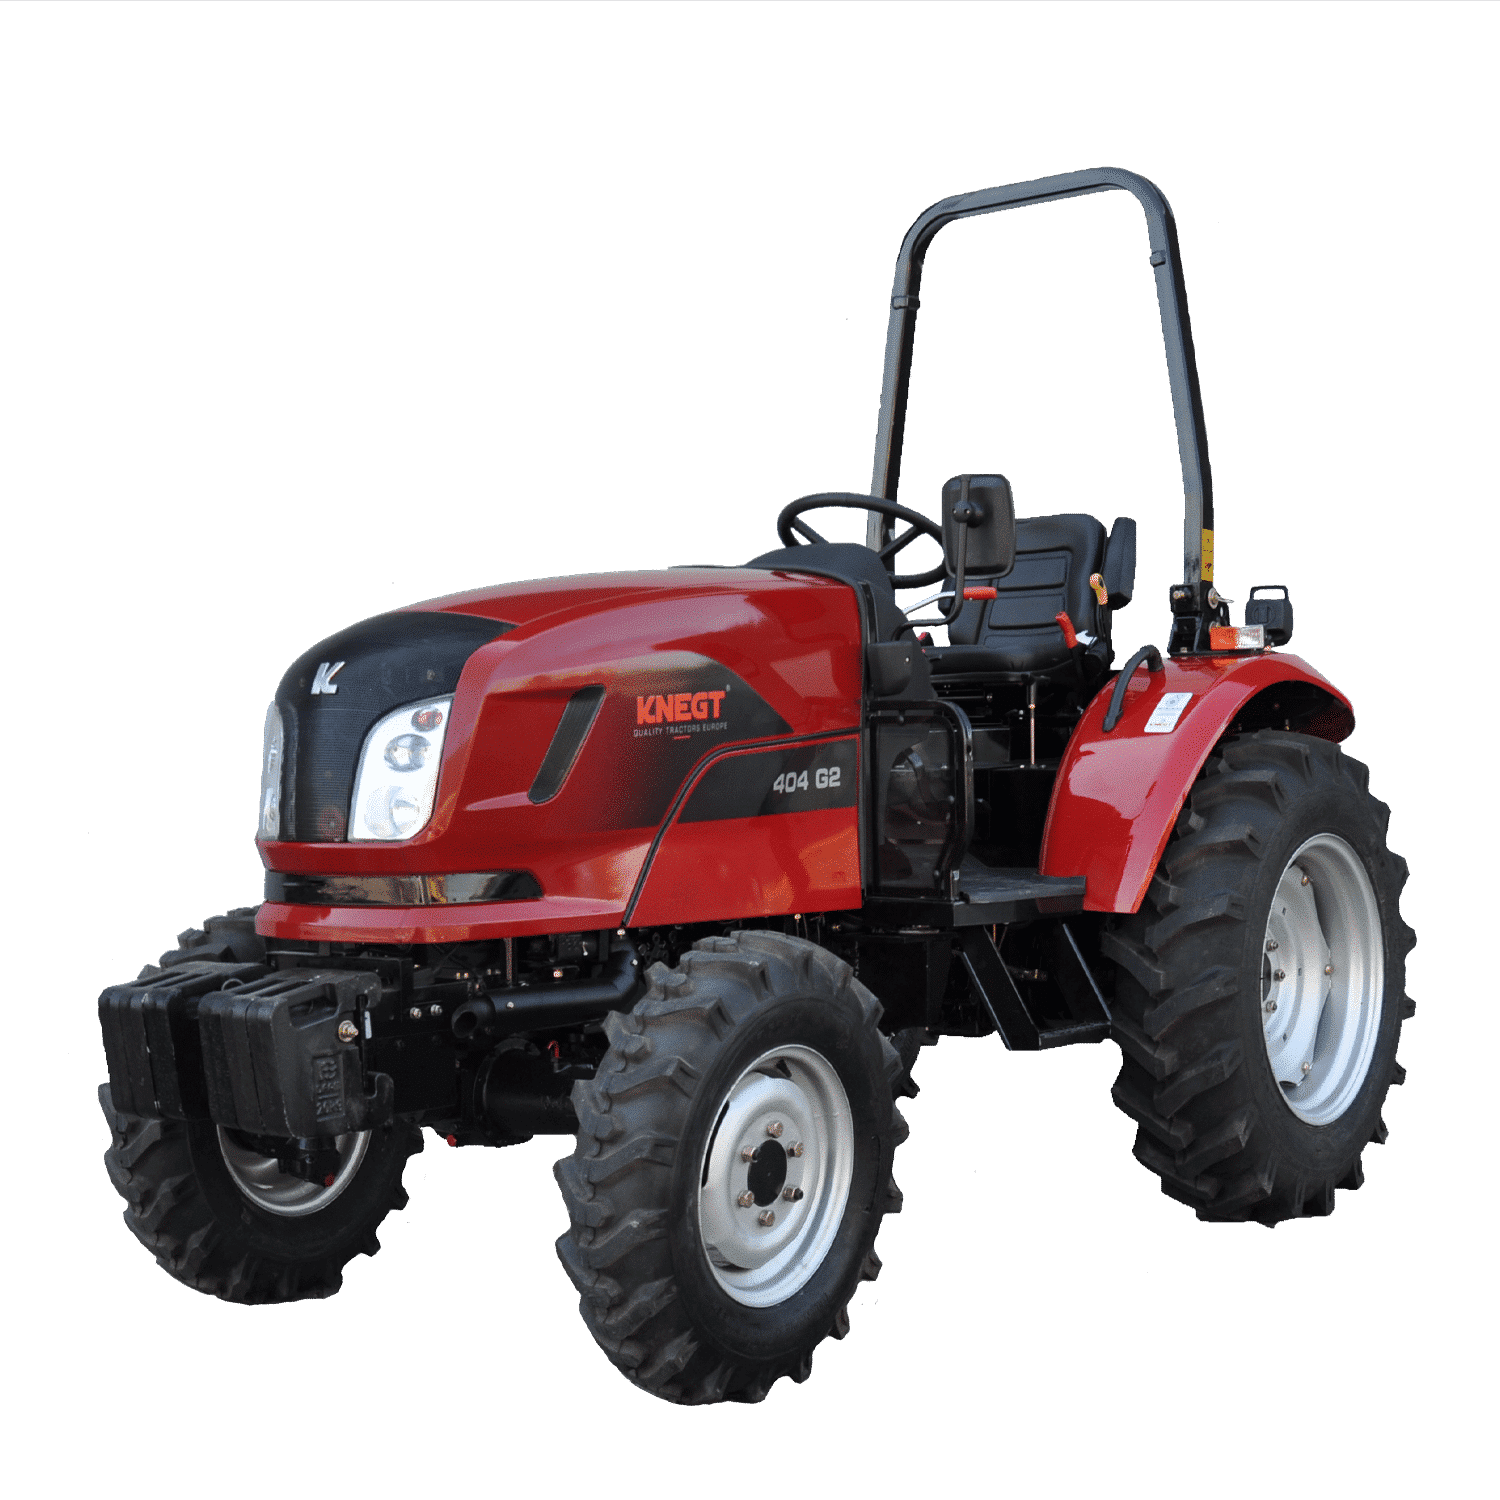 knegt_compact_tractor_productfoto_404g2_voorkant